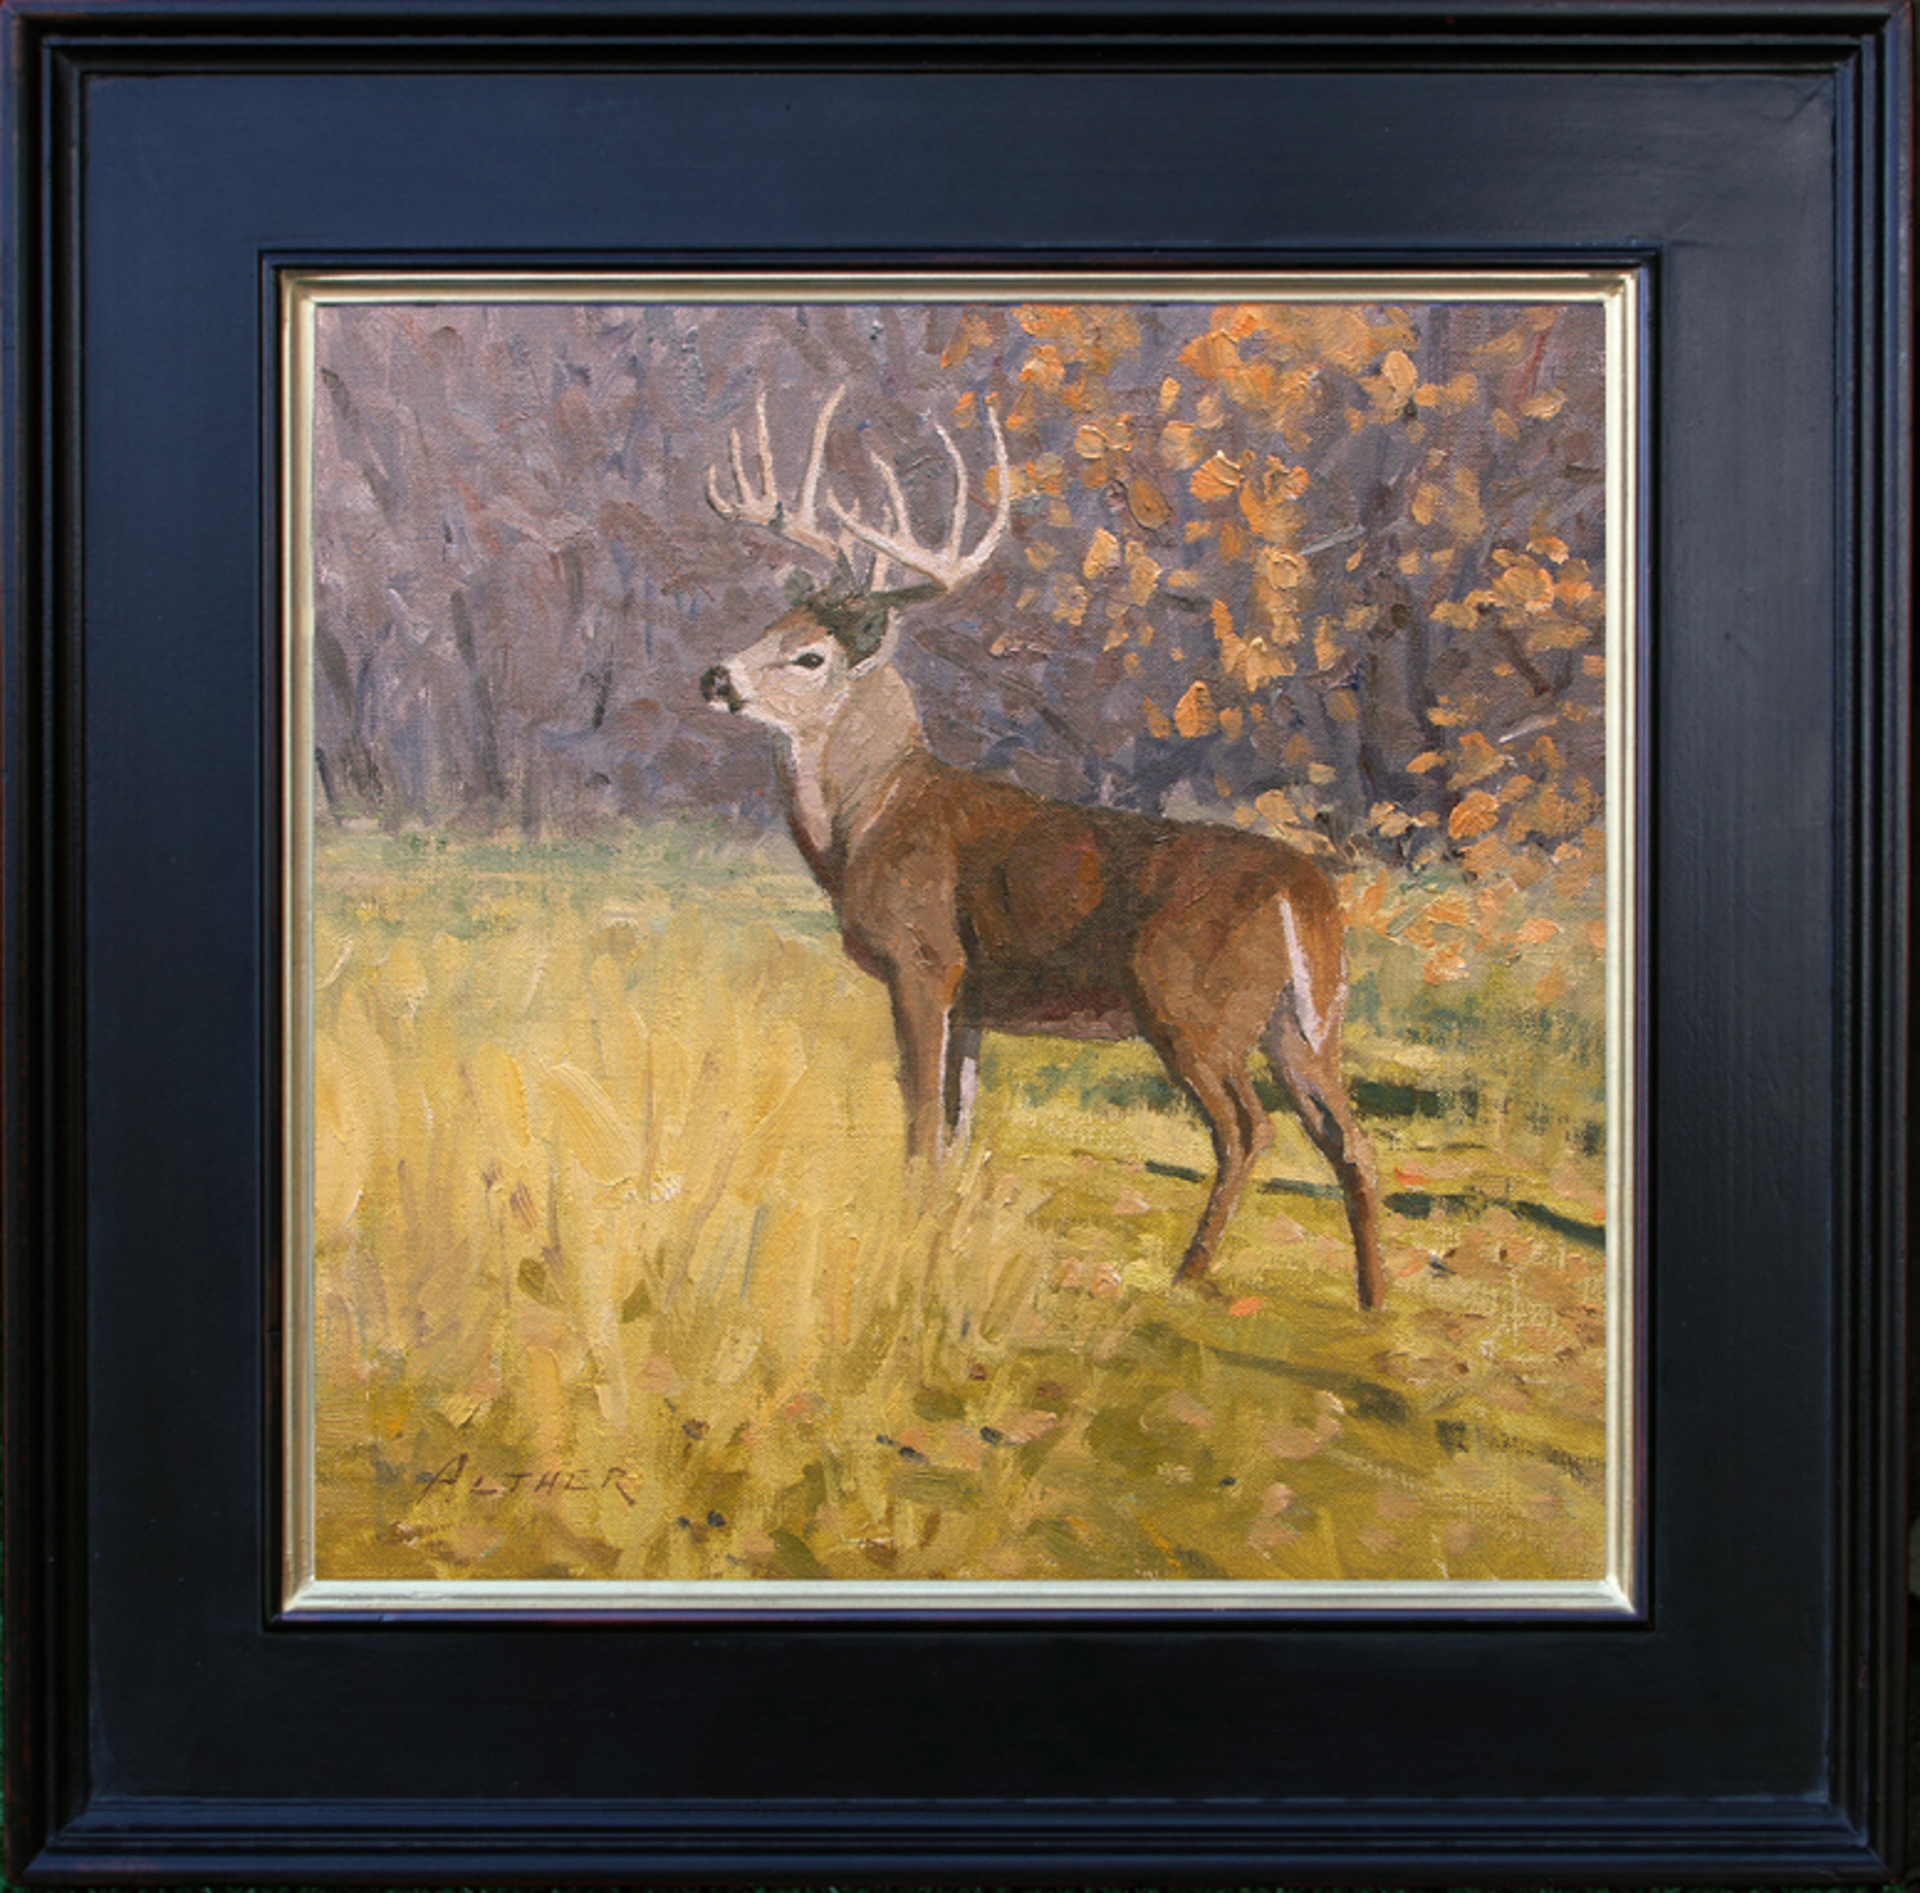 Autumn Whitetail by William Alther